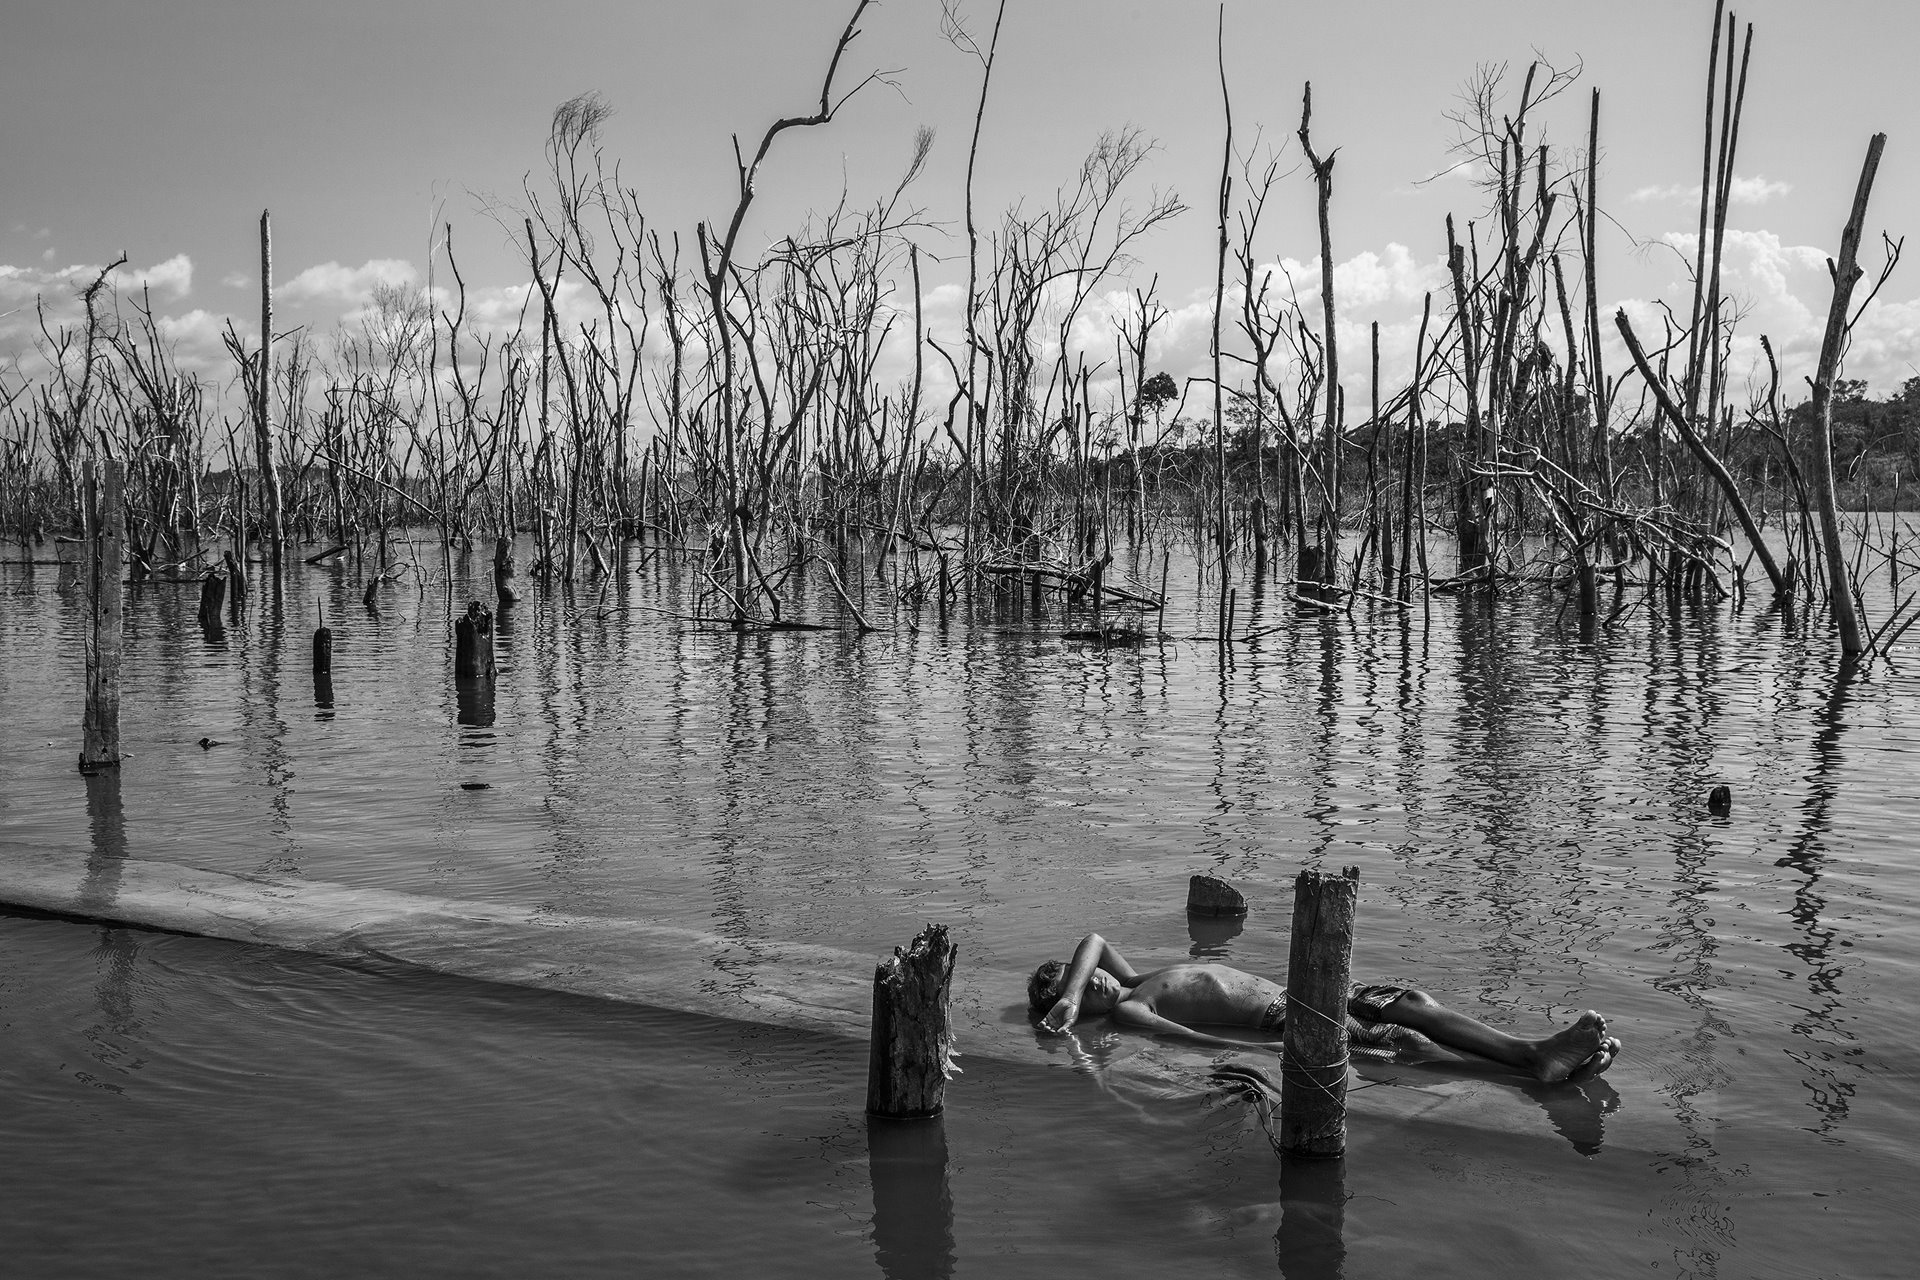 A boy rests on a dead tree trunk in the Xingu River in Paratizão, a community located near the Belo Monte hydroelectric dam, Pará, Brazil. He is surrounded by patches of dead trees, formed after the flooding of the reservoir.